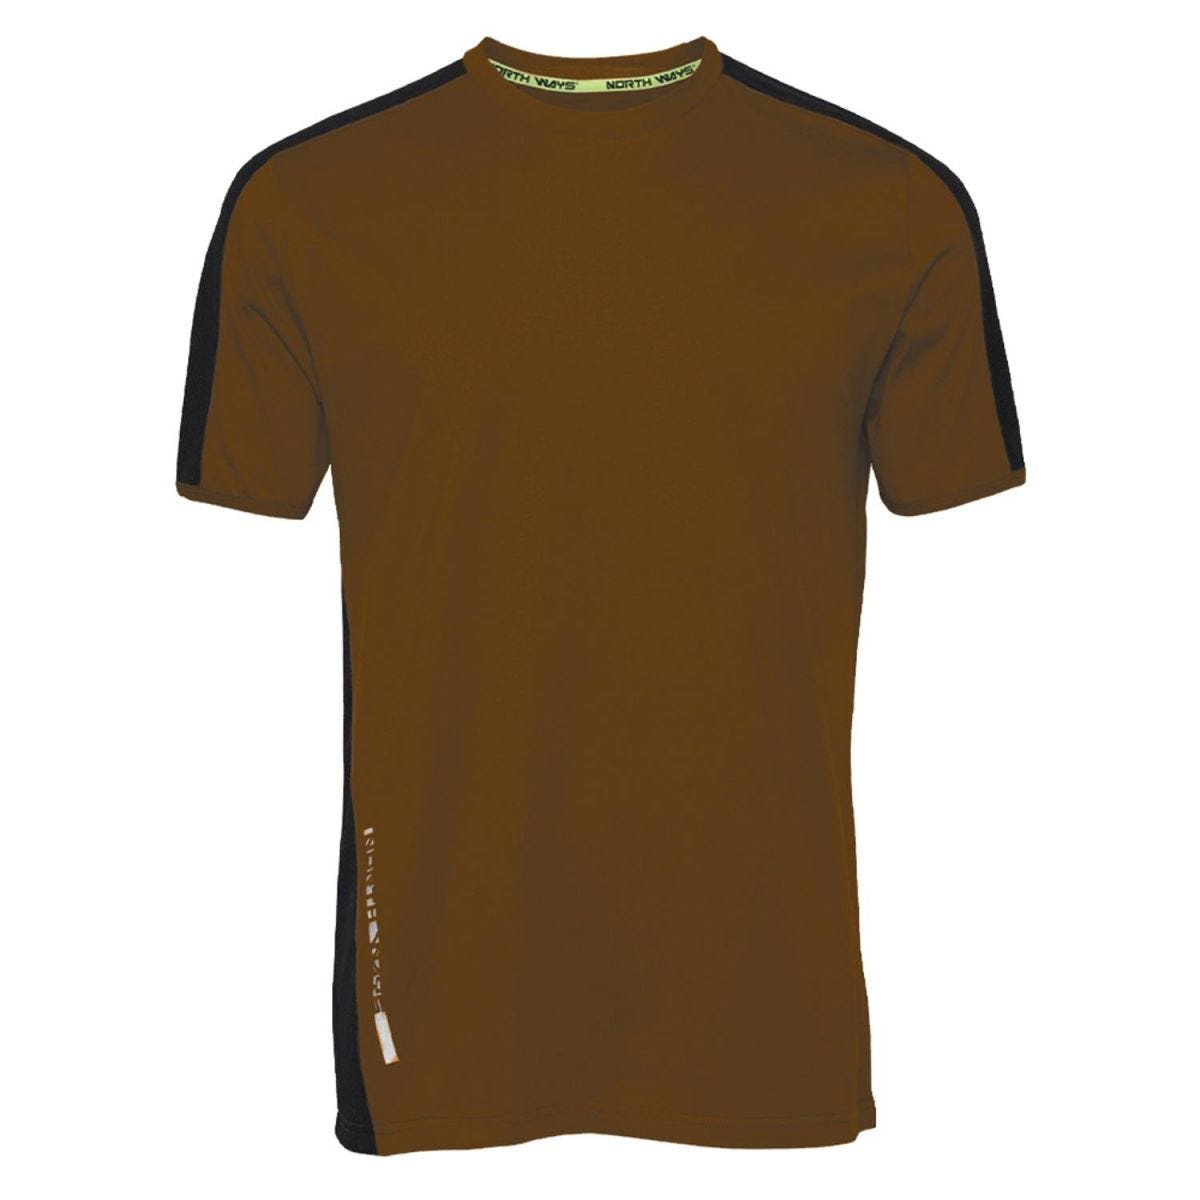 Tee-shirt à manches courtes pour homme Andy camel - North Ways - Taille M 0